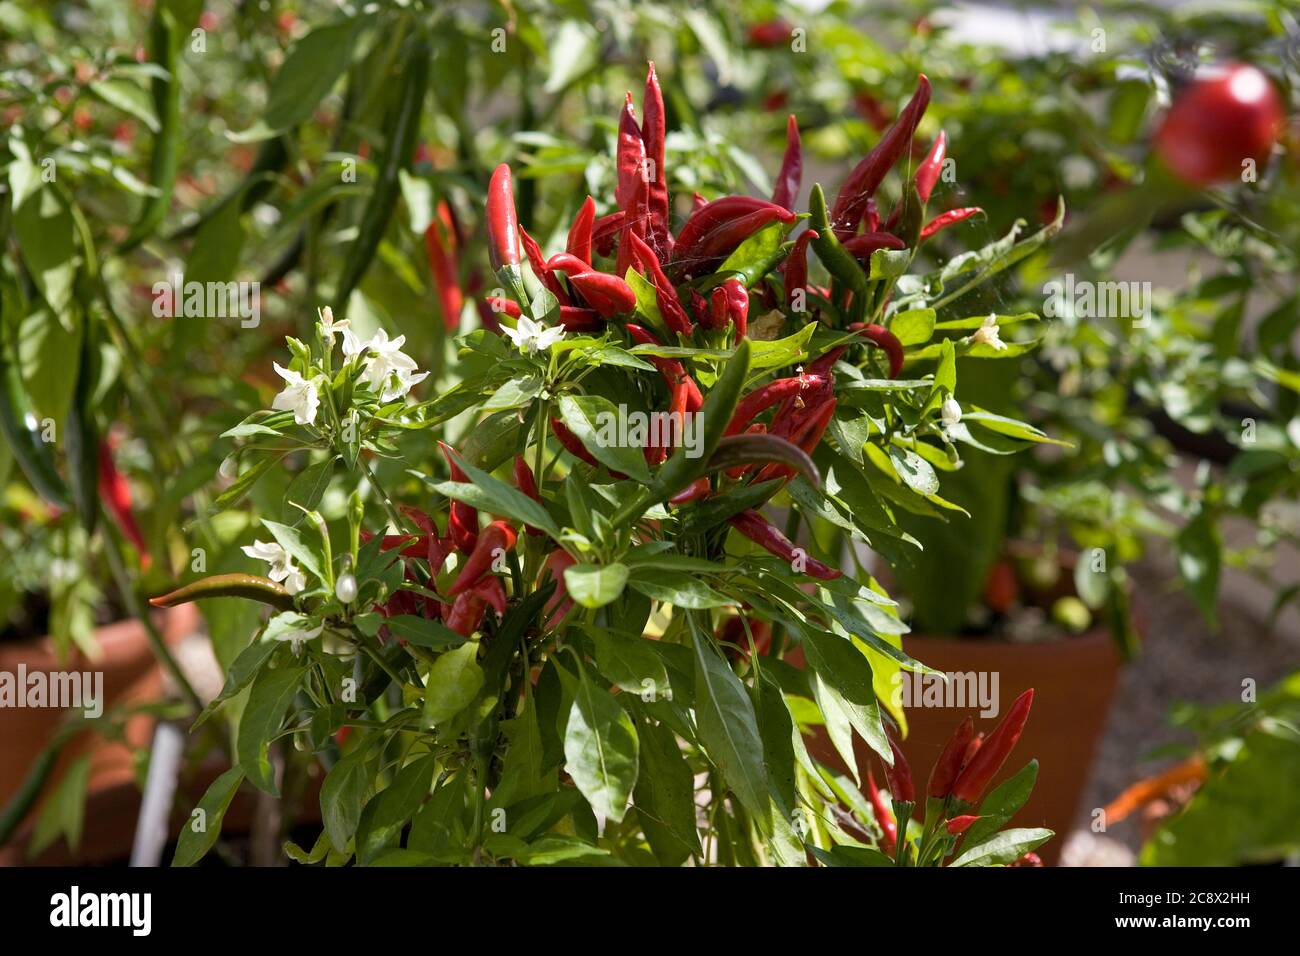 Chillies (Capsicum frutescens 'Thai Burapa') growing in a Victorian greenhouse, West Dean Gardens, West Sussex, England, UK Stock Photo